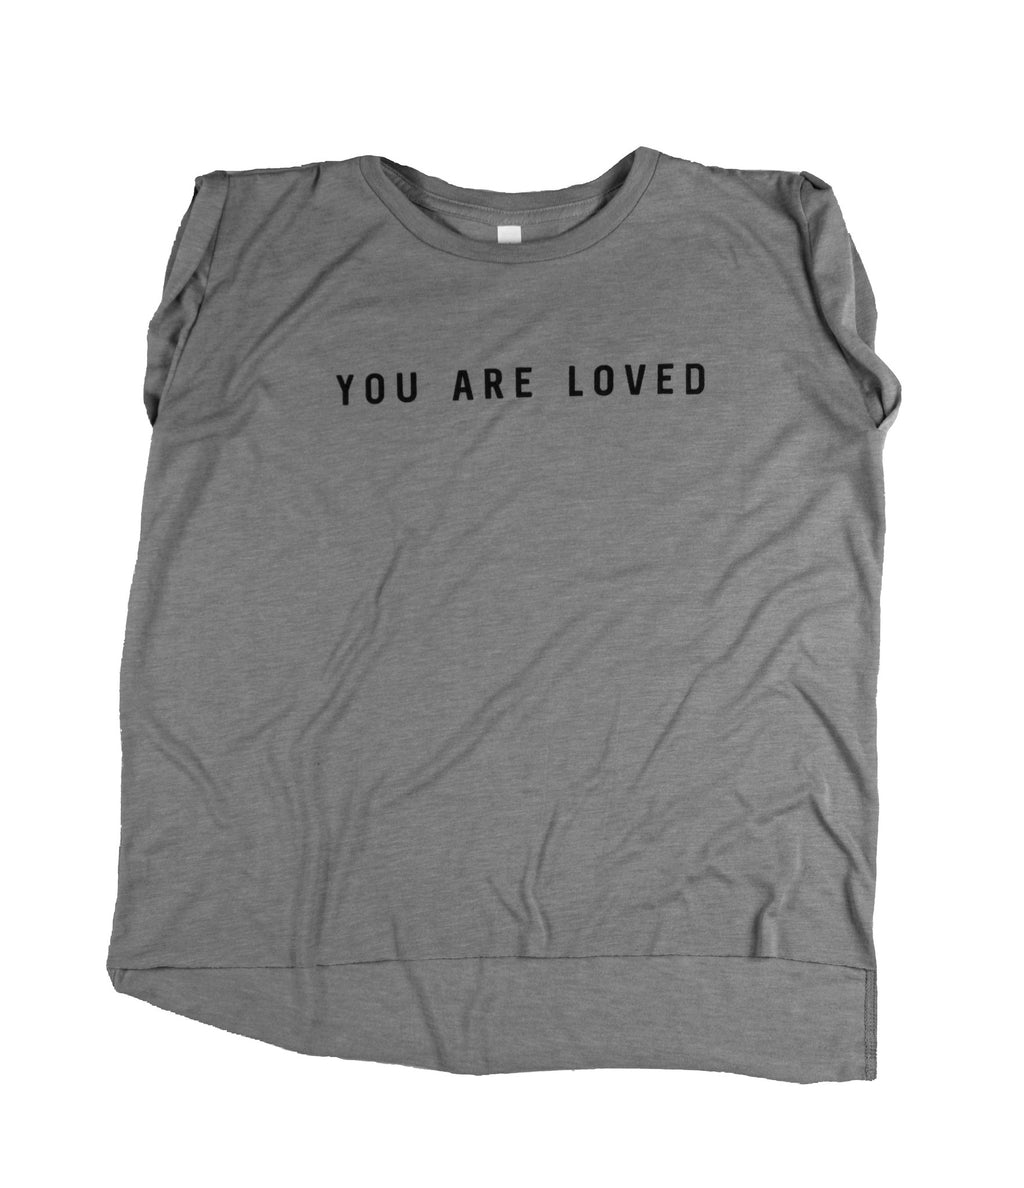 YOU ARE LOVED CONCRETE WOMEN'S ROLLED CUFF MUSCLE T-SHIRT